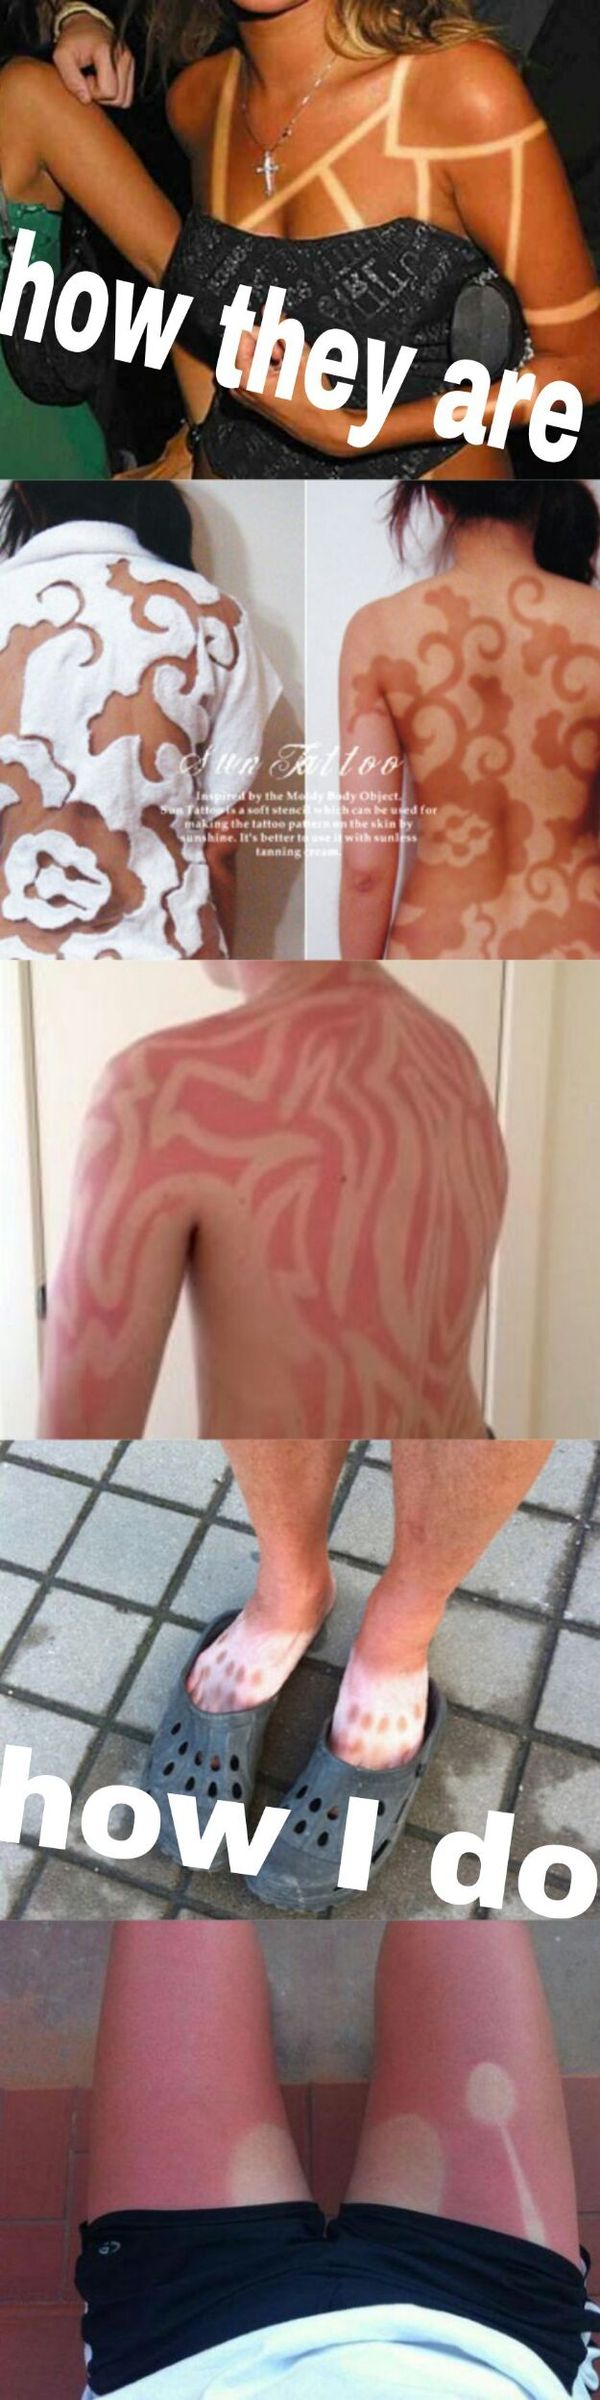 sunburn art is a real thing and it's glorious - meme